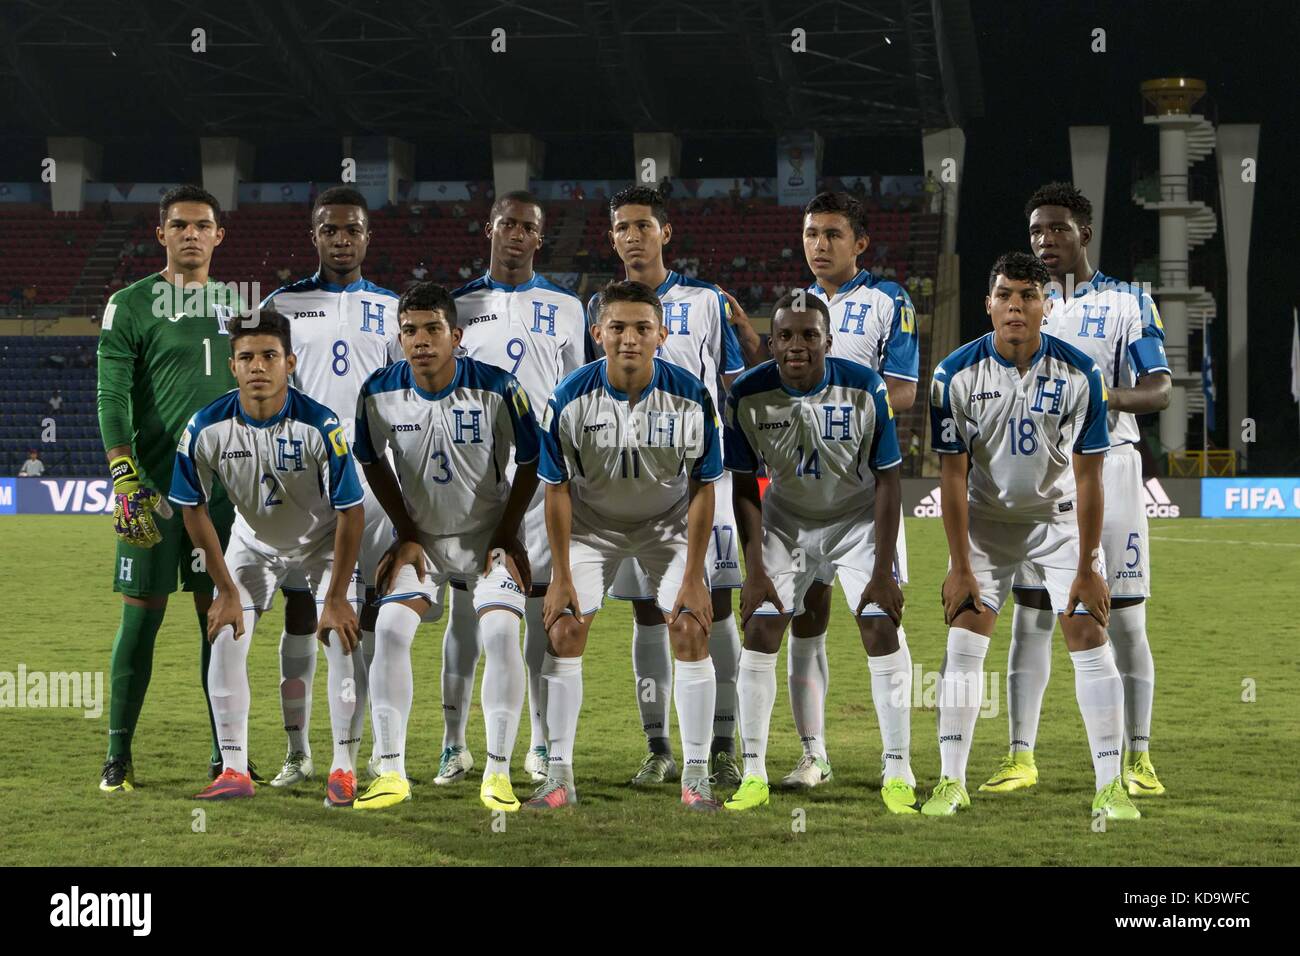 Guwahati, Assam, India. 11th Oct, 2017. The Honduras Team.Moments from FIFA U-17 World Cup Group E match between Honduras vs New Caledonia.In a Group E match of the FIFA U-17 World Cup, Honduras defeated New Caledonia by 5-0 at Indira Gandhi Athletic Stadium, Guwahati, India. This was HondurasÃ¢â‚¬â„¢ biggest win in the U-17 World Cup since their debut in 2007. Credit: Vikramjit Kakati/ZUMA Wire/Alamy Live News Stock Photo